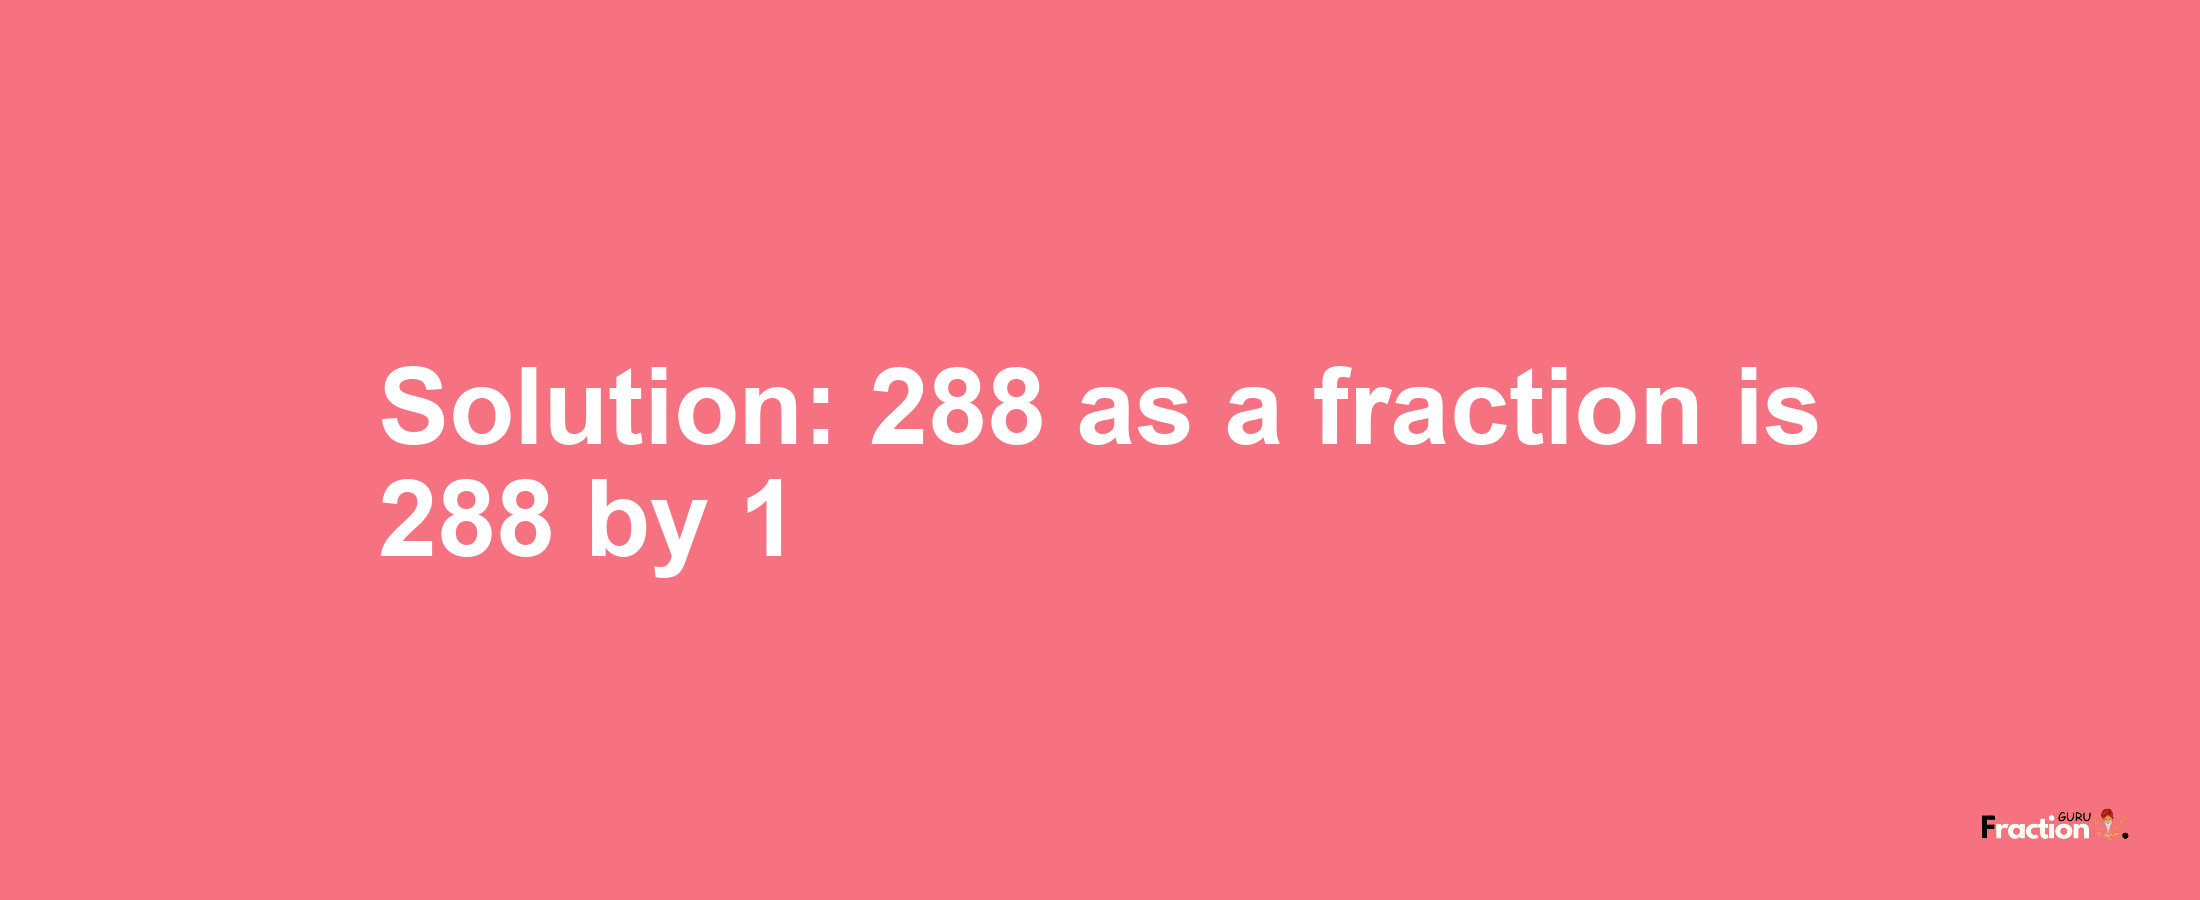 Solution:288 as a fraction is 288/1